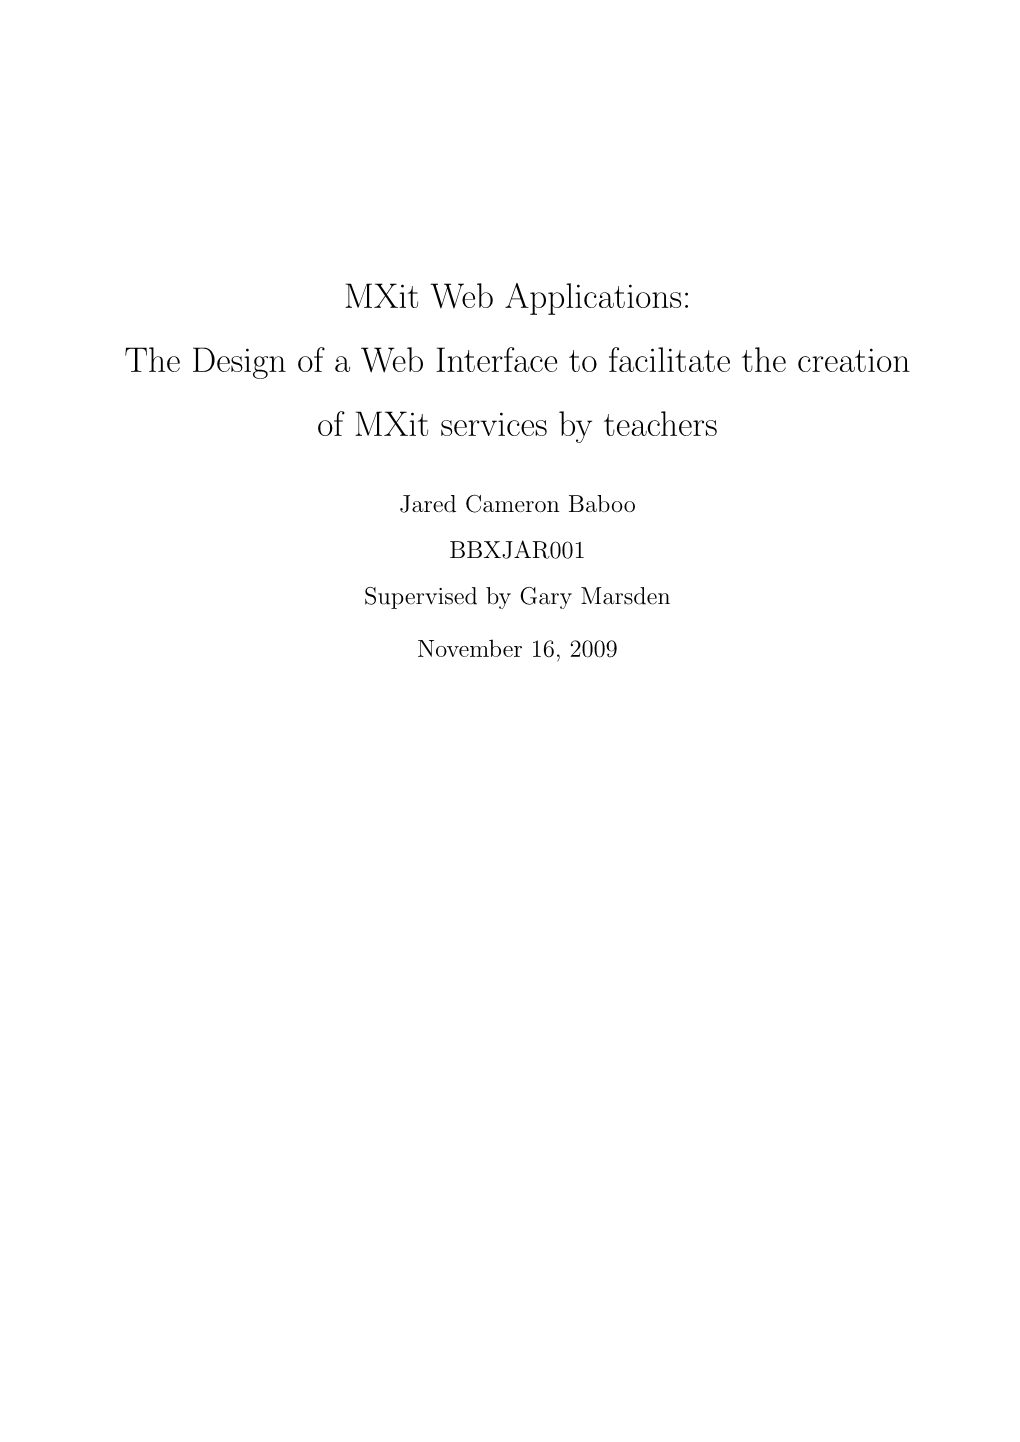 Mxit Web Applications: the Design of a Web Interface to Facilitate the Creation of Mxit Services by Teachers